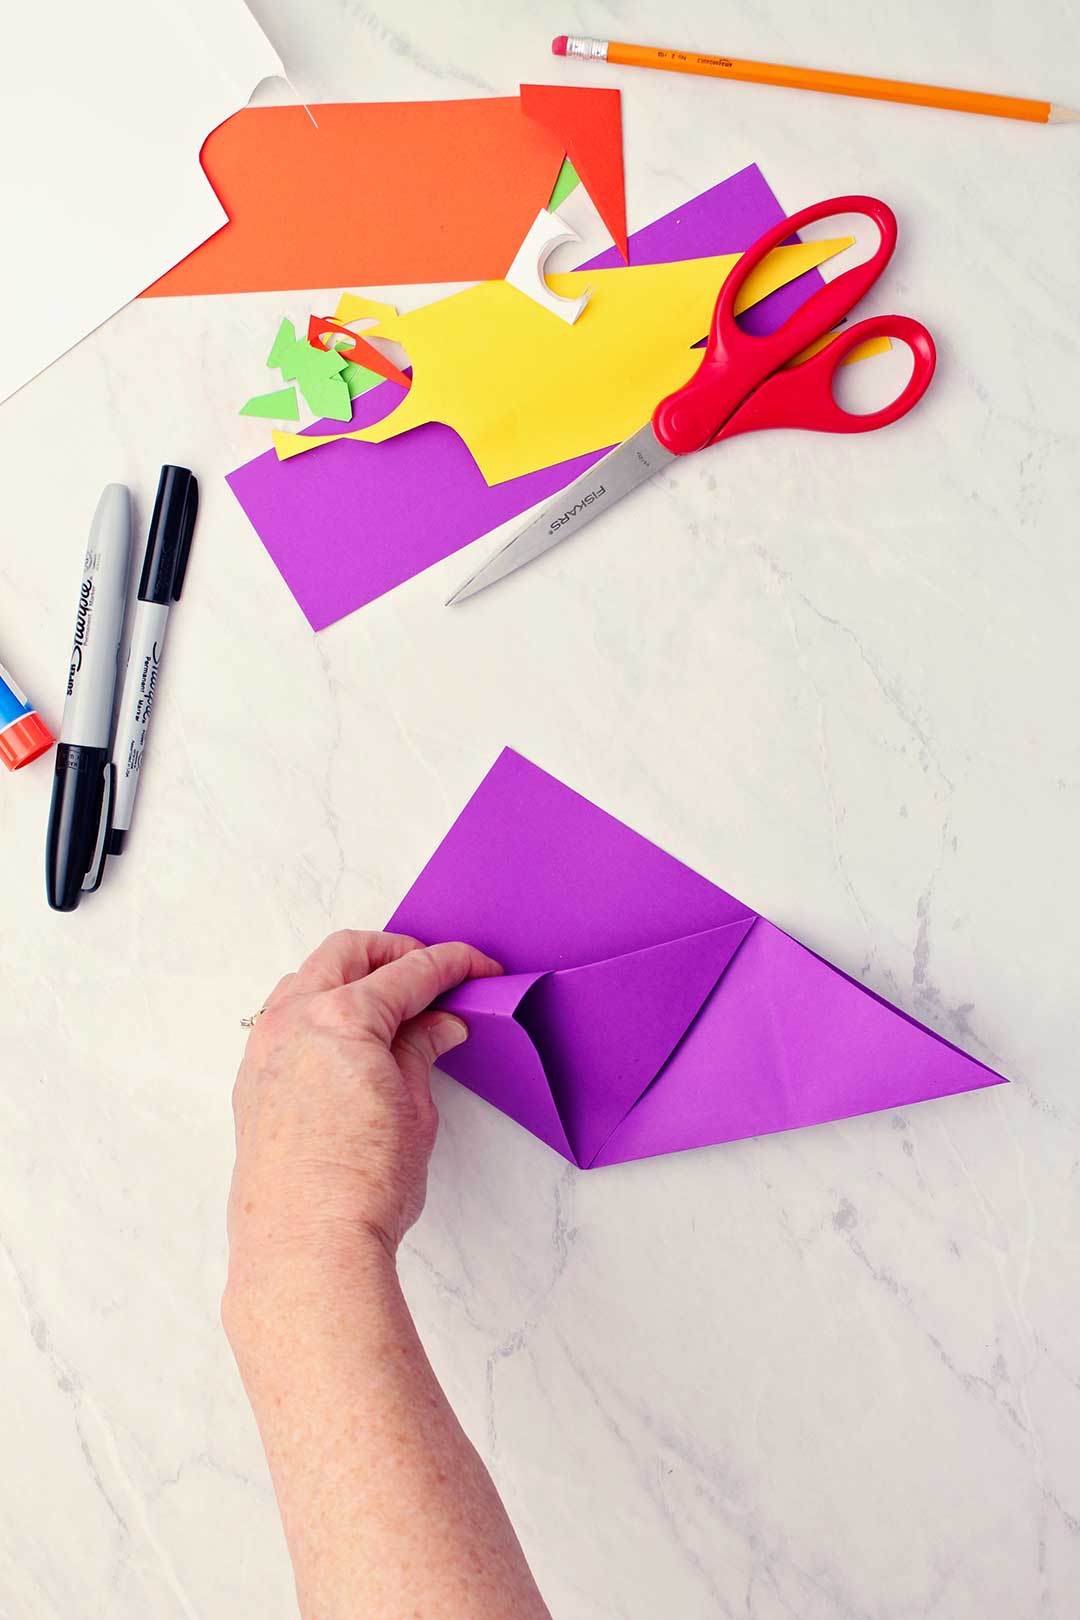 View of hand folding in the first corner of the purple paper to secure it into the diagonal center fold.